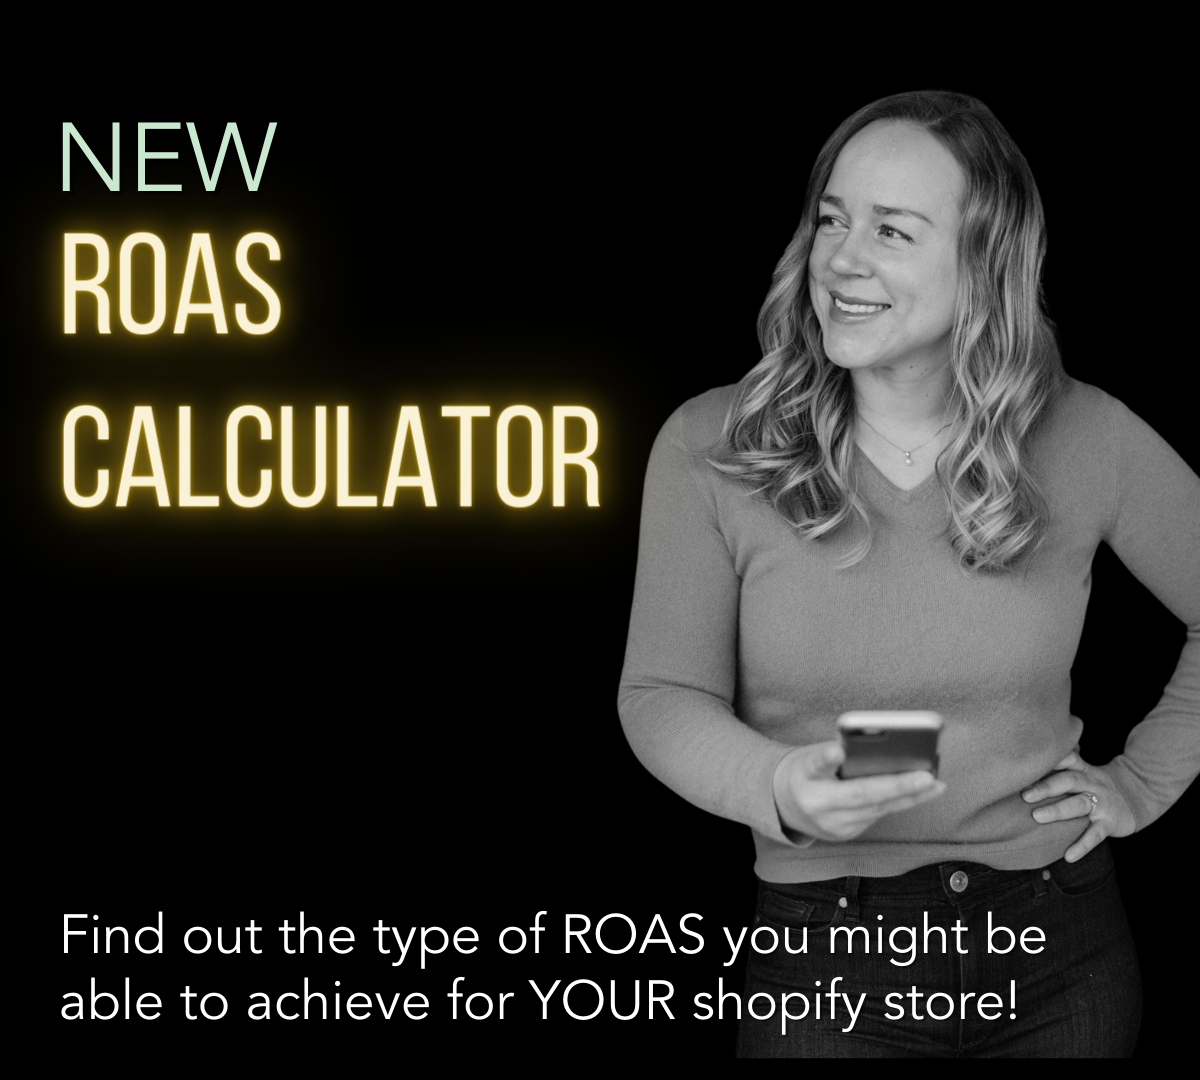 Find out the ROAS you can expect with our NEW ROAS Calculator!